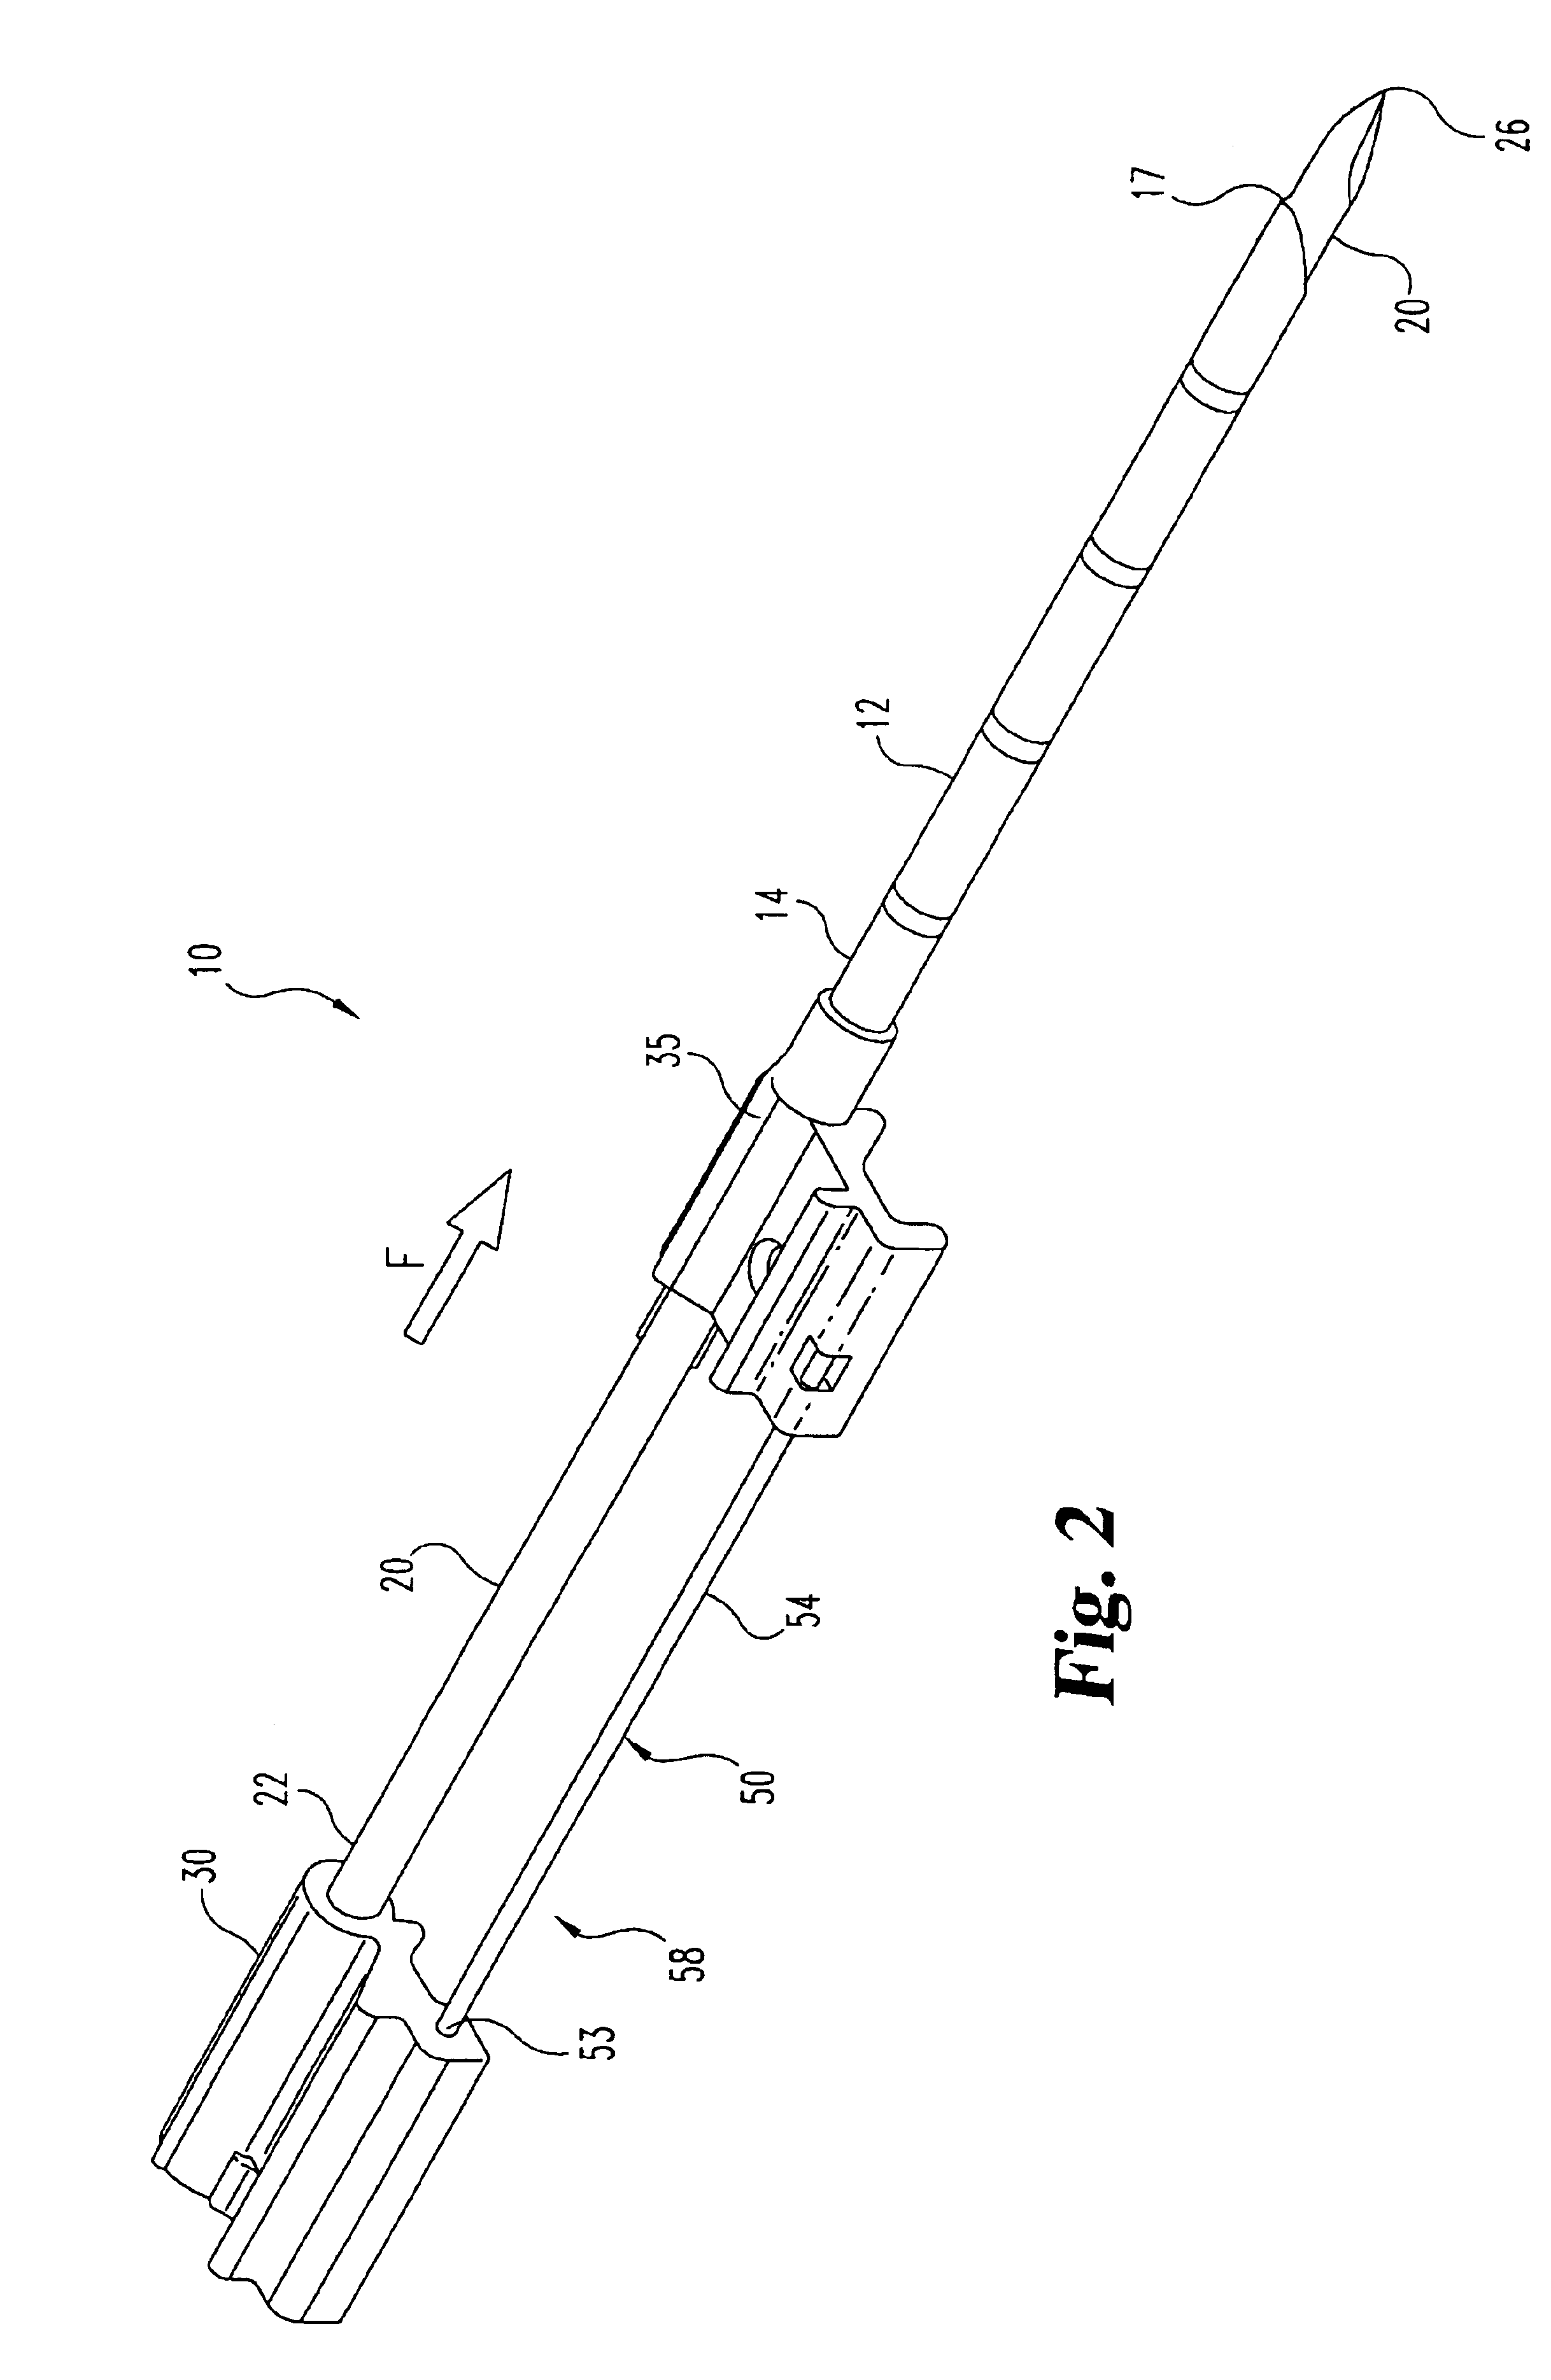 Biopsy needle with integrated guide pin